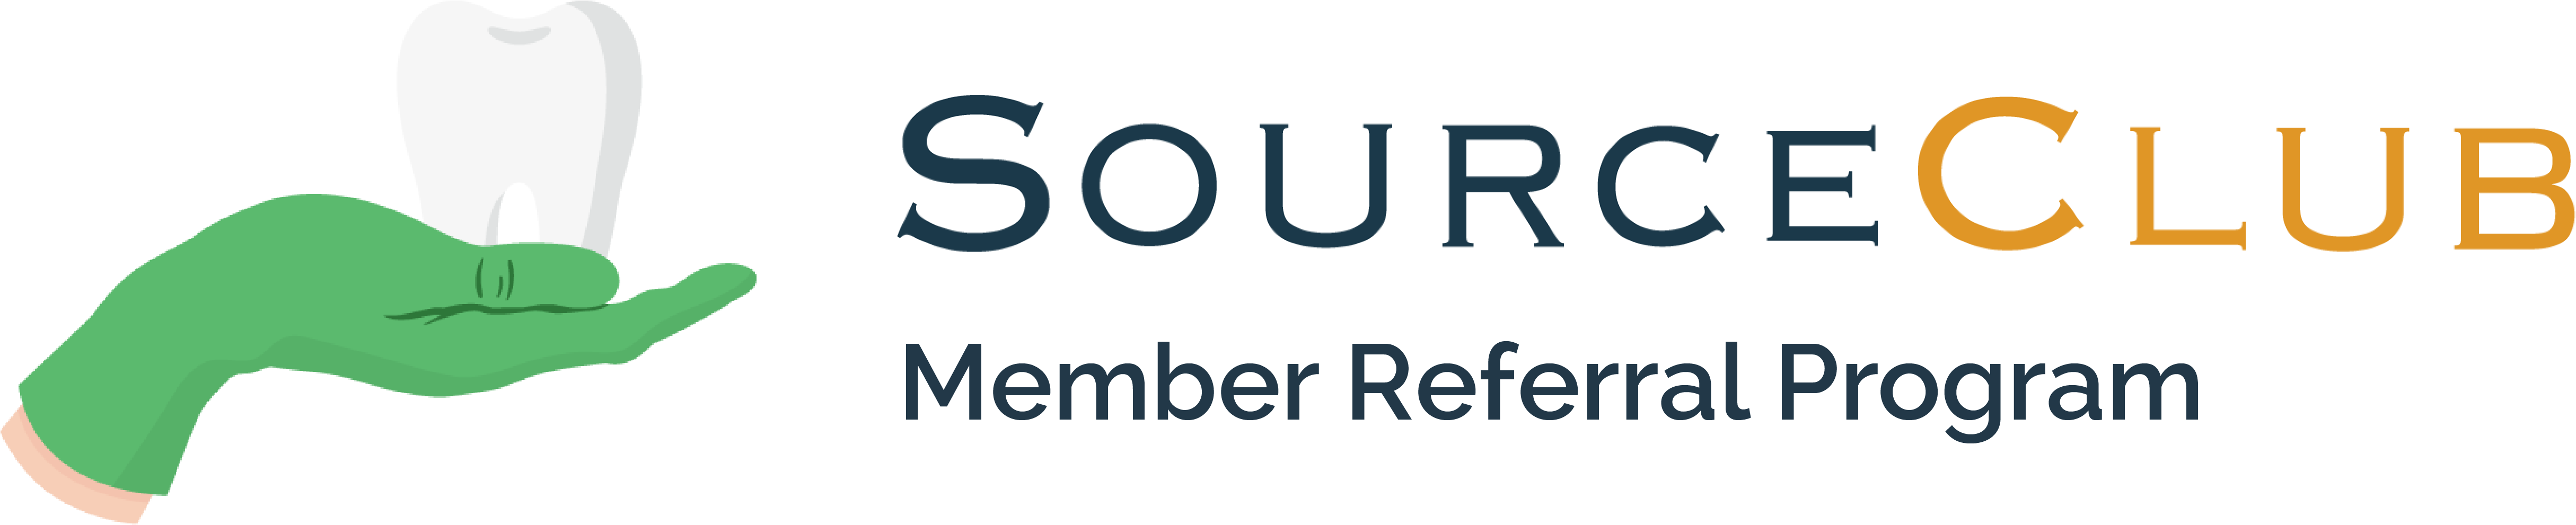 SourceClub referral program dso group purchasing